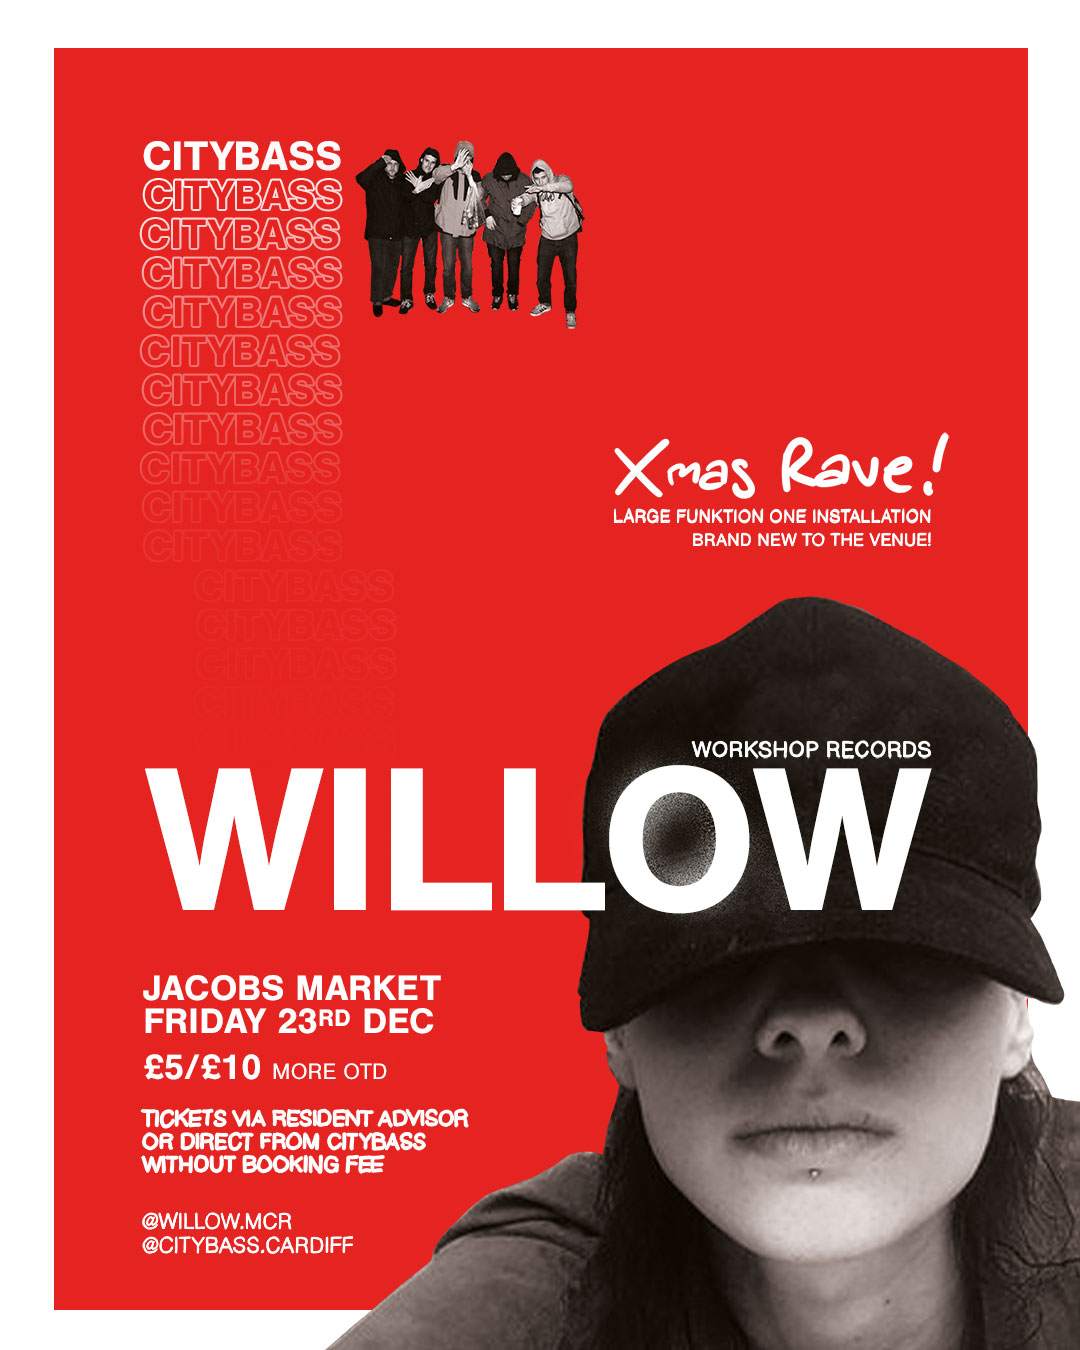 [CANCELLED] CITYBASS presents WILLOW (Workshop) - フライヤー表